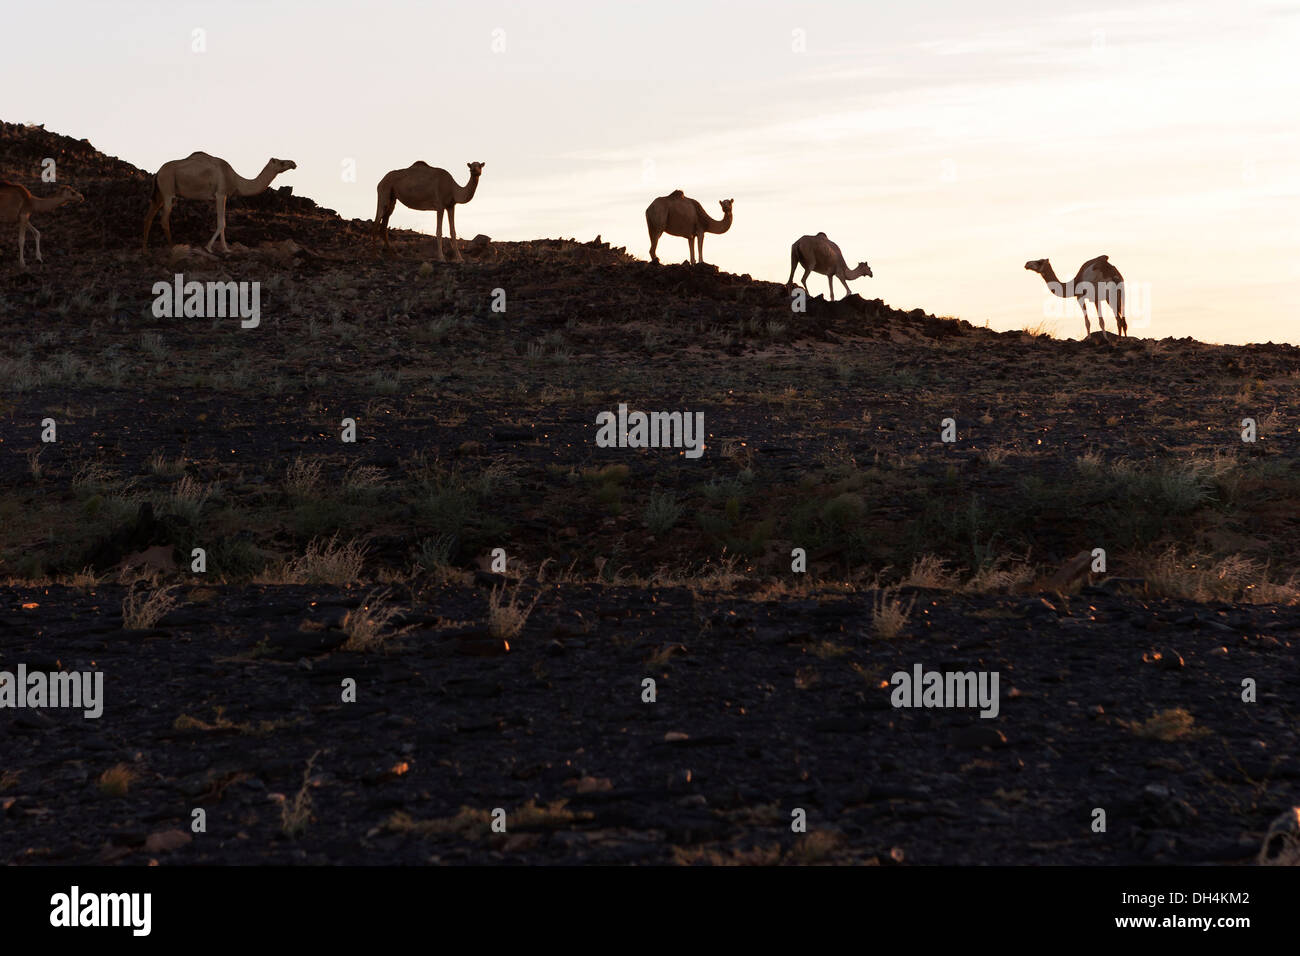 Silhouette of wild herd of dromedary camels on granite rock outcrop at dawn, Sahara Desert, Mauritania, NW Africa Stock Photo